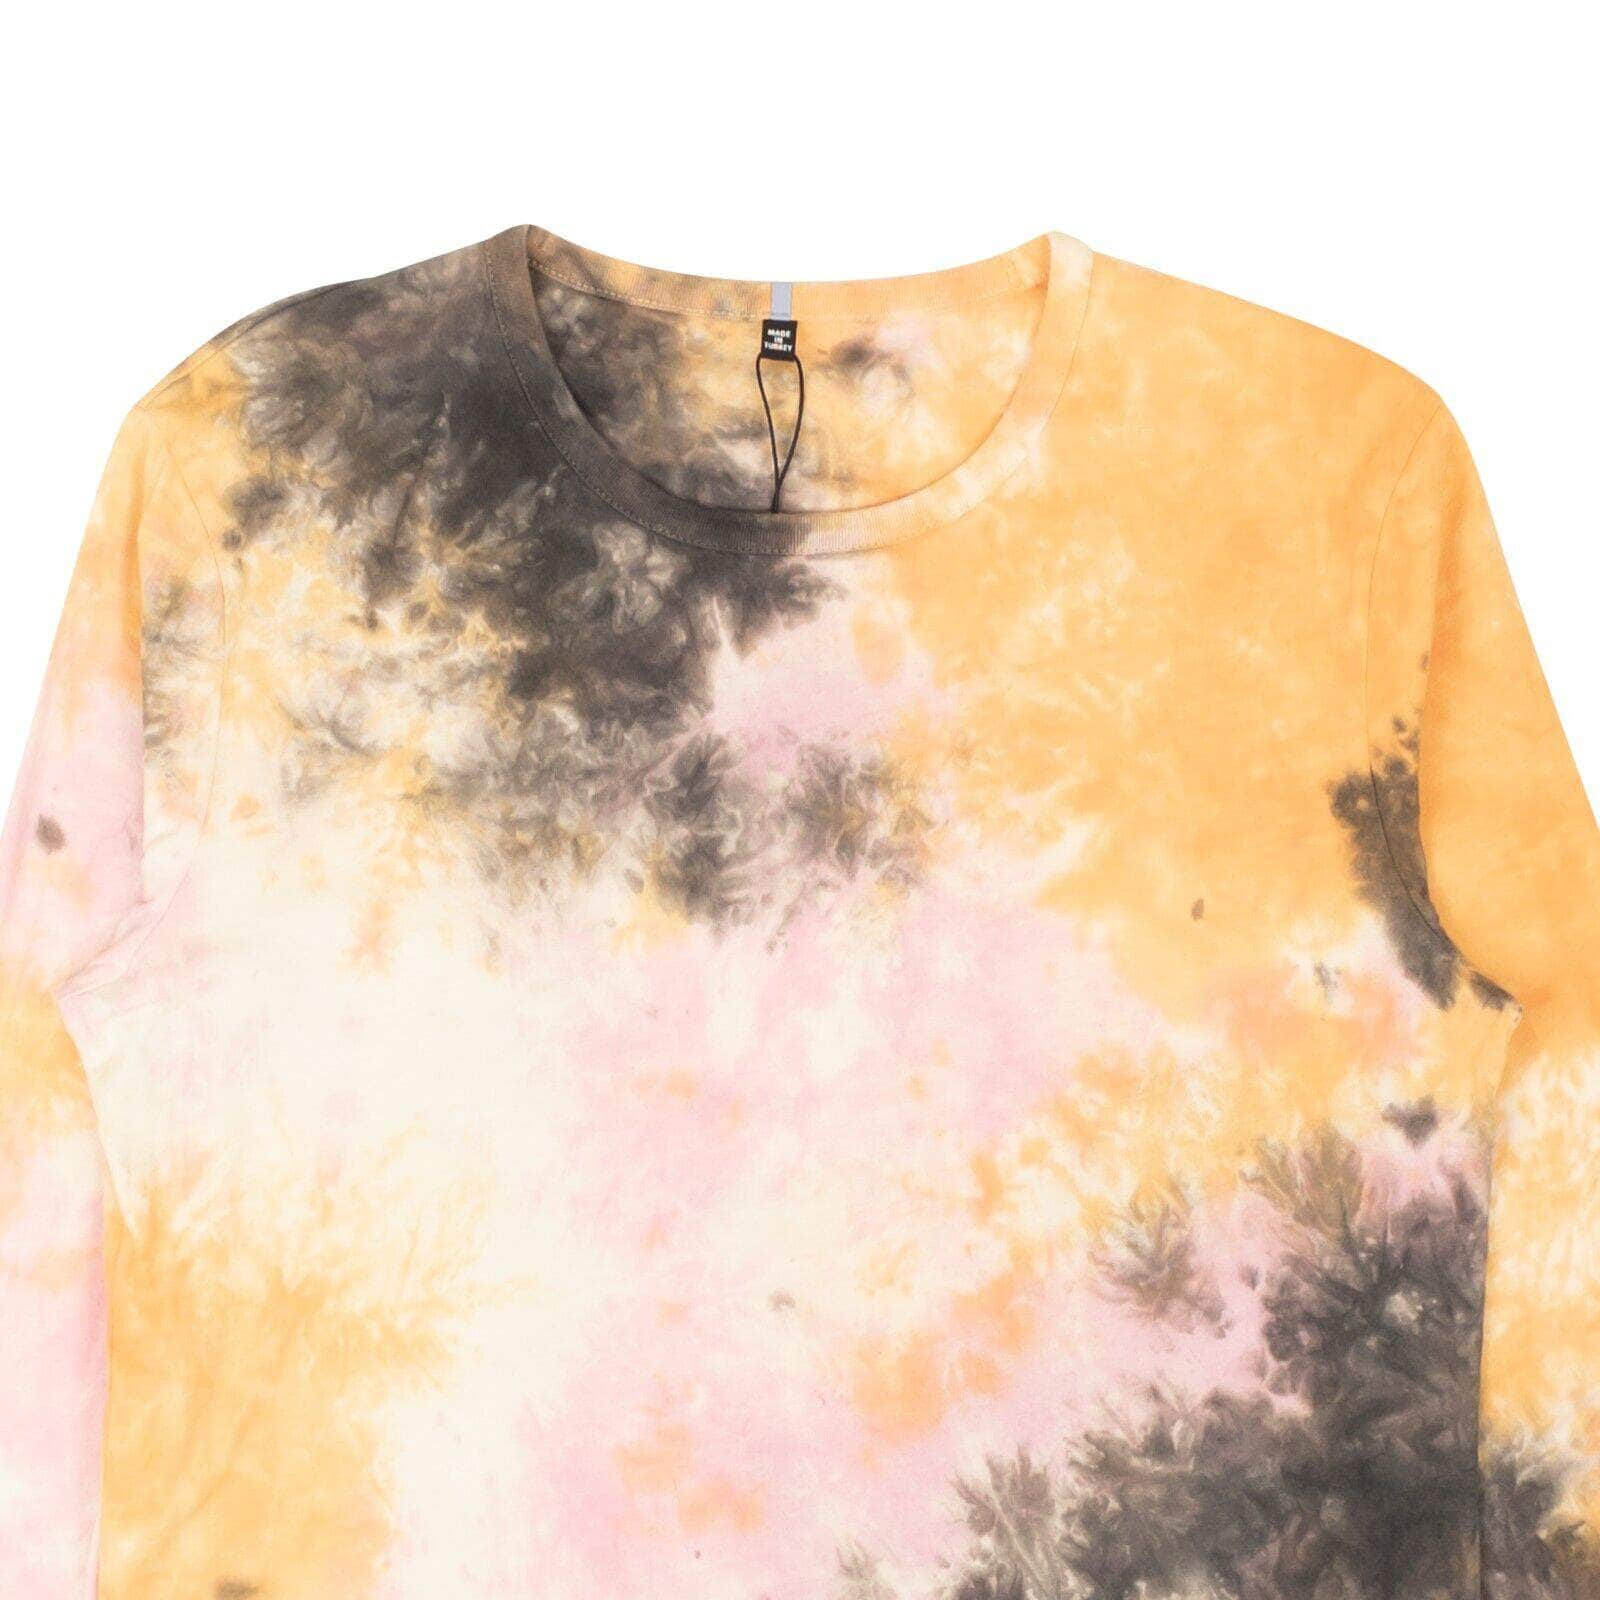 MCQ channelenable-all, chicmi, couponcollection, gender-mens, main-clothing, mcq, mens-shoes, size-m, size-s, under-250 S / 6.25E+05 Multi Tie Dye Unity Jersey Long Sleeve T-Shirt 95-MCQ-1007/S 95-MCQ-1007/S